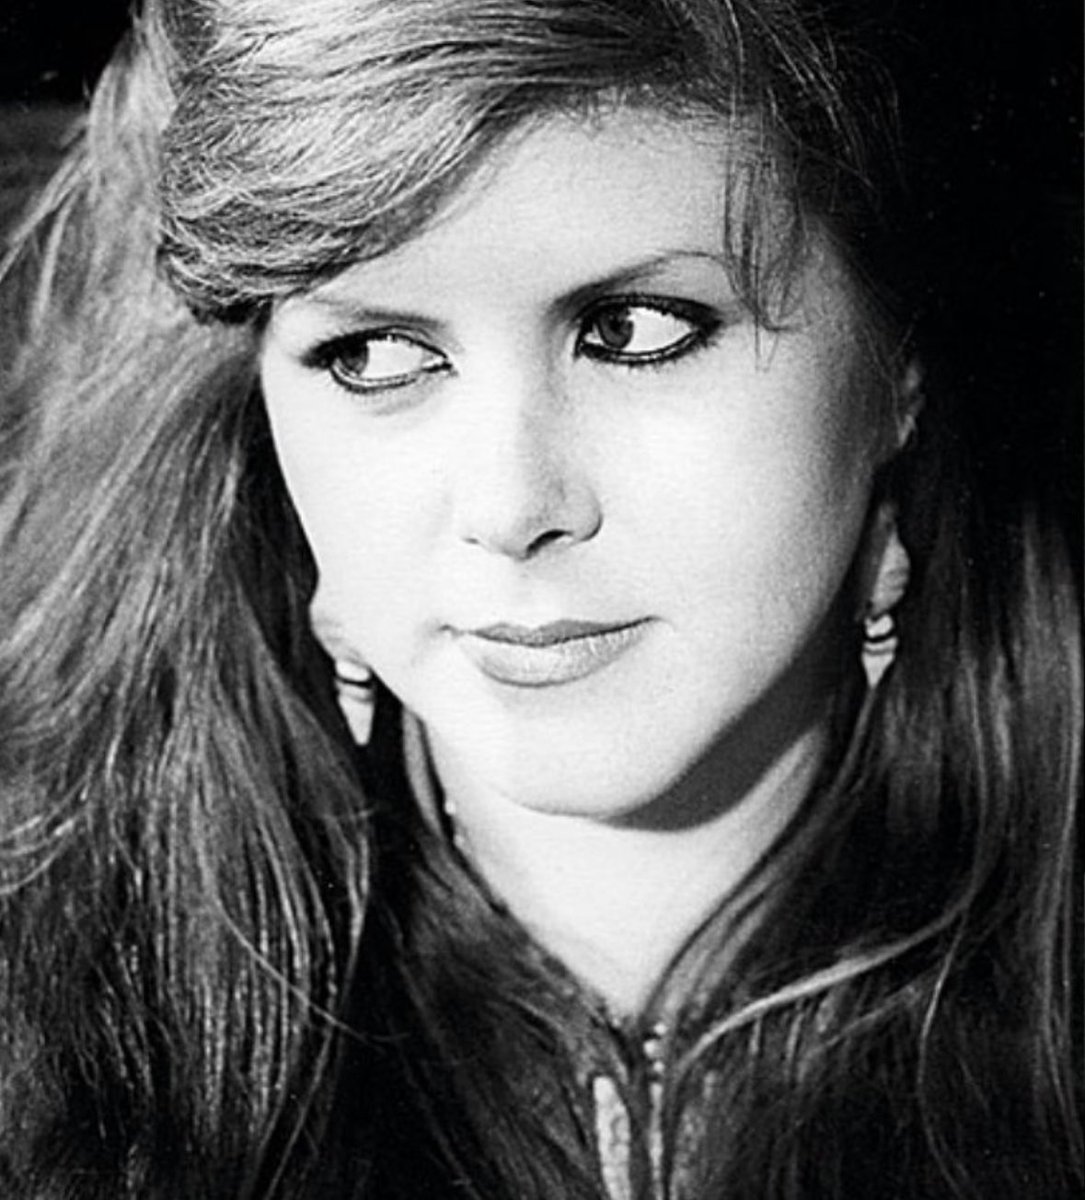 The life and soul should have been 64 today ❤️ #kirstymaccoll